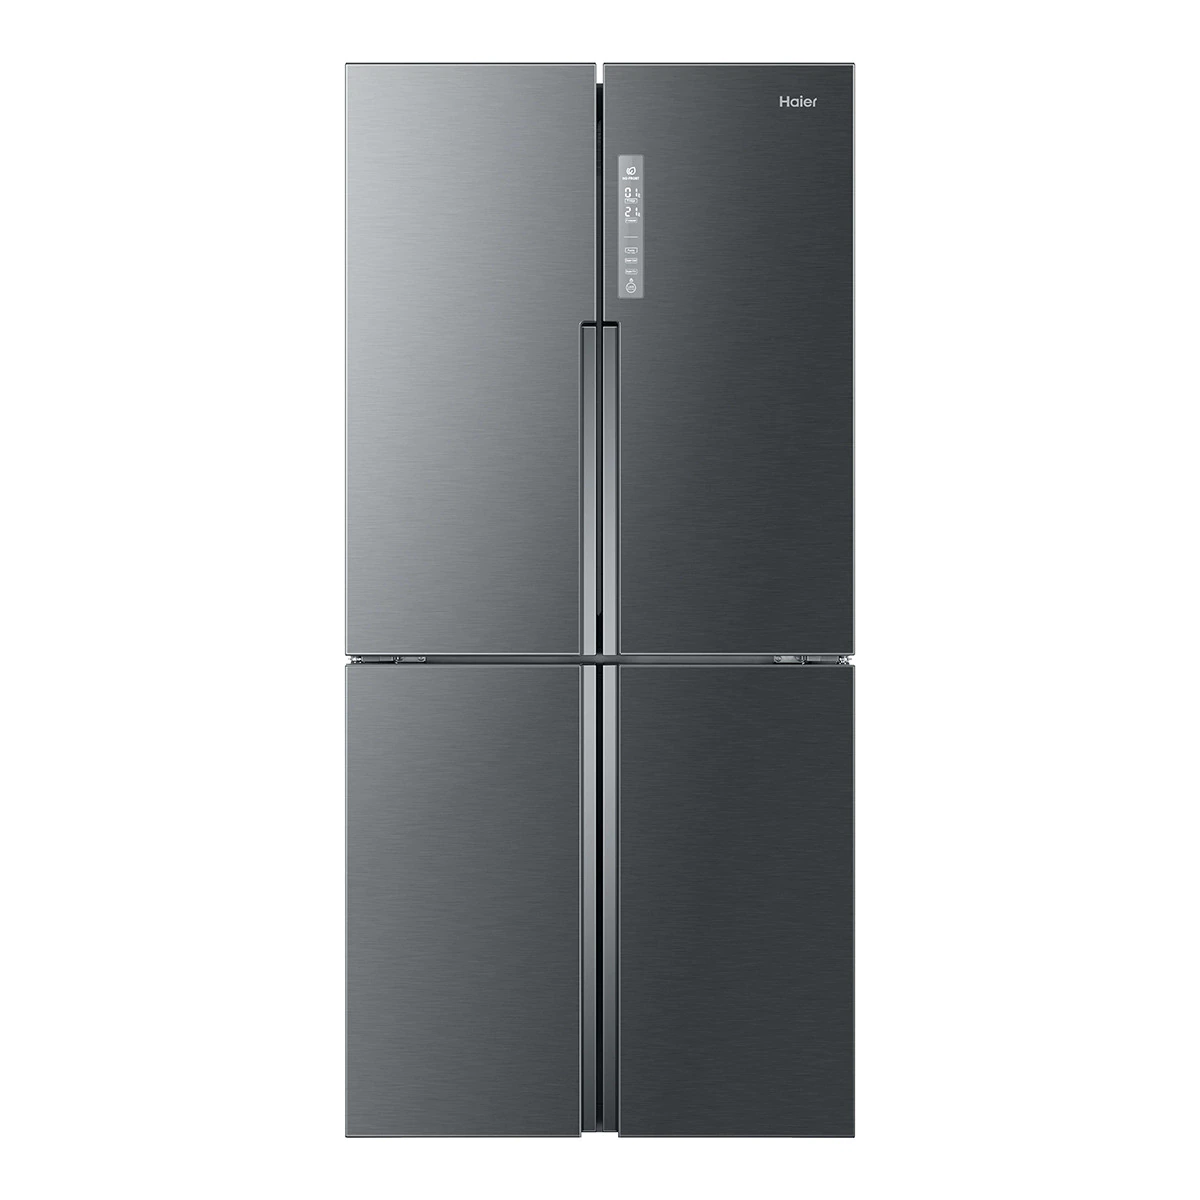 Frigorífico Side by Side Haier HTF-458DG6 No Frost 4 puertas